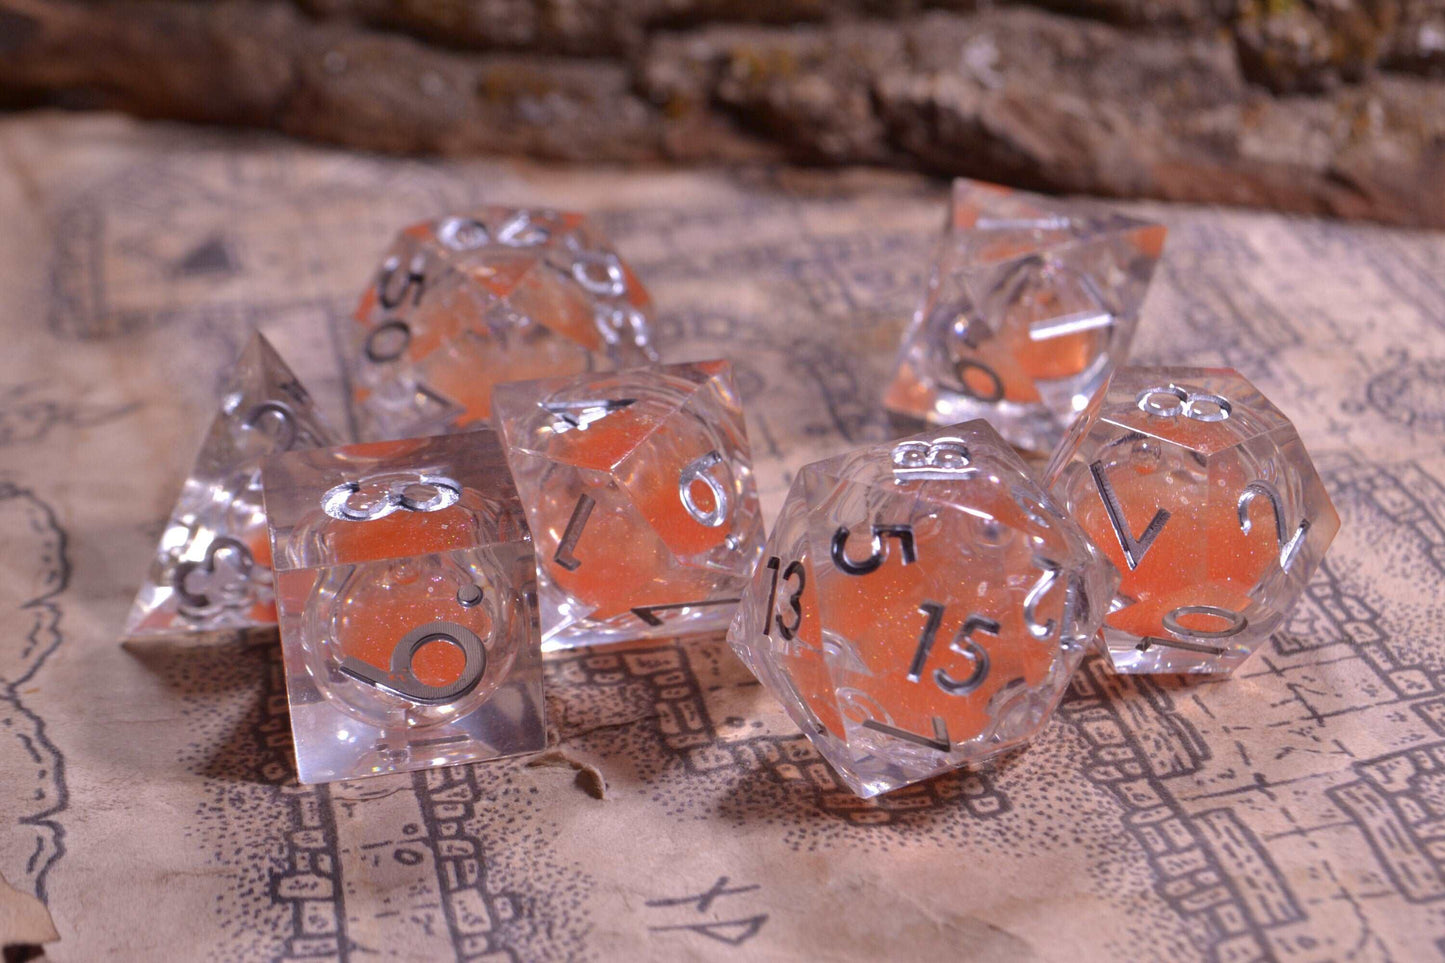 Peach Orange Sharp Edge Liquid Core Resin D&D Dice Set With Metallic Silver Numbering - For Dungeons and Dragons - Gift Set